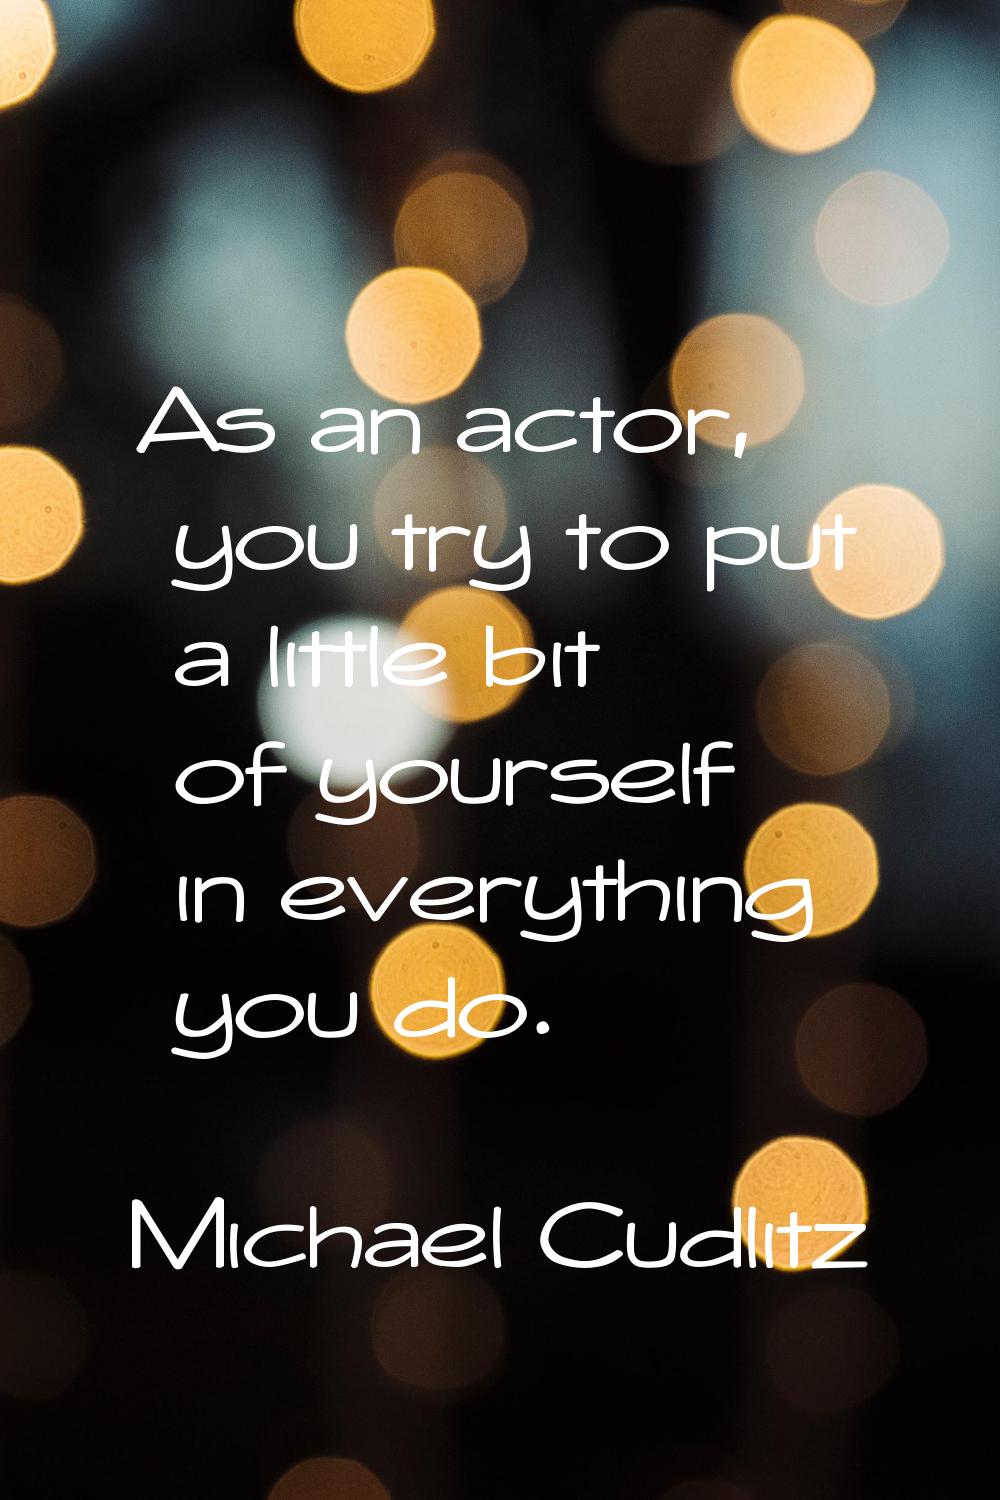 As an actor, you try to put a little bit of yourself in everything you do.